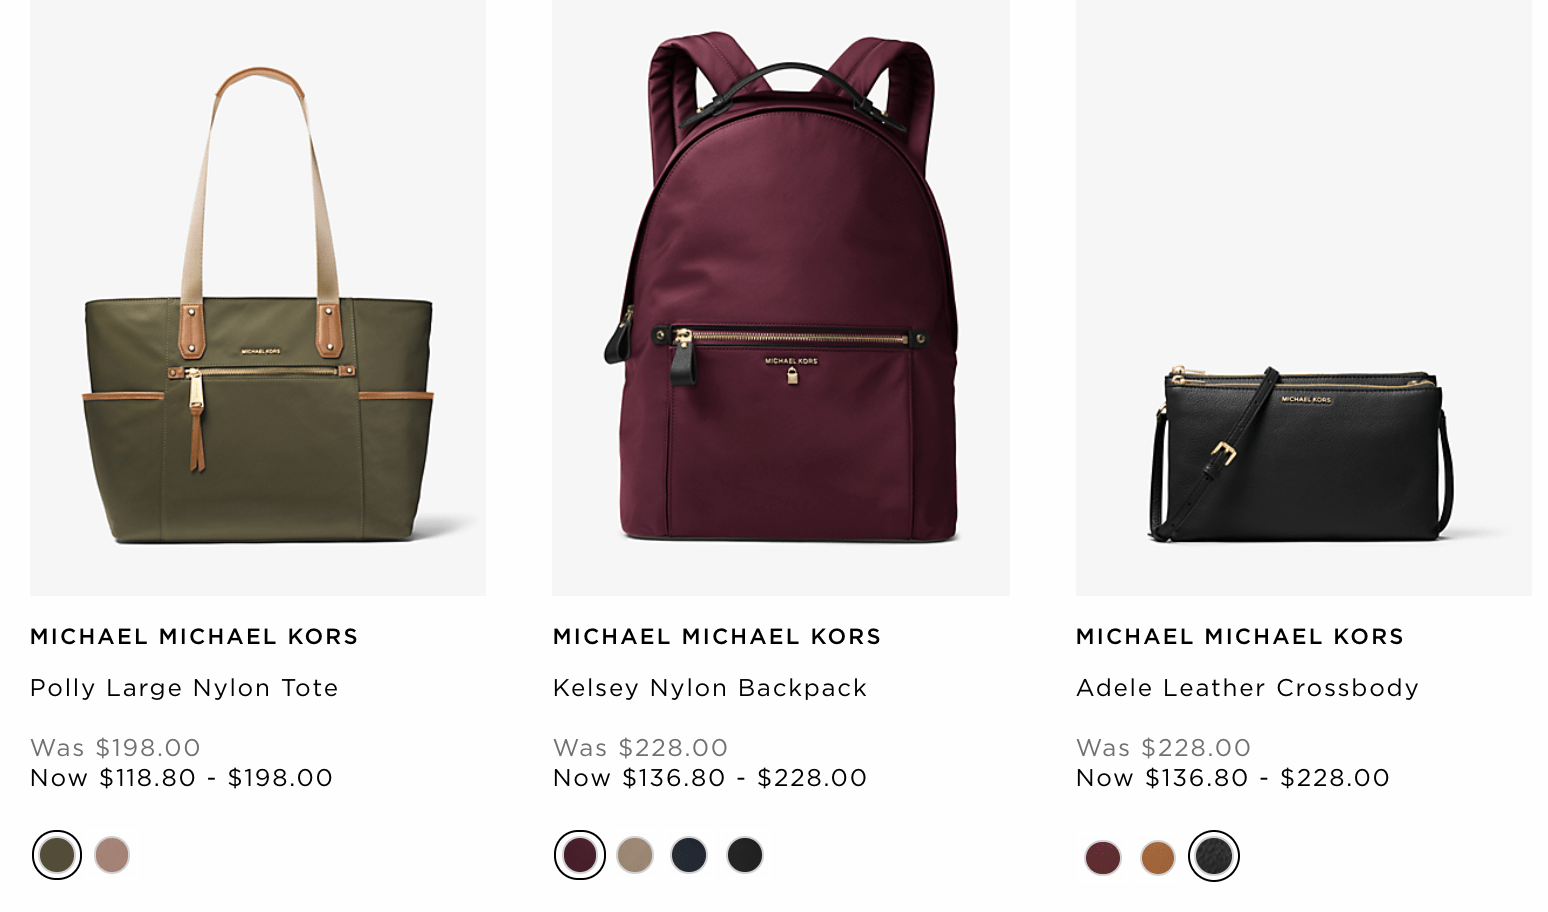 Michael Kors Canada Boxing Day Sale 